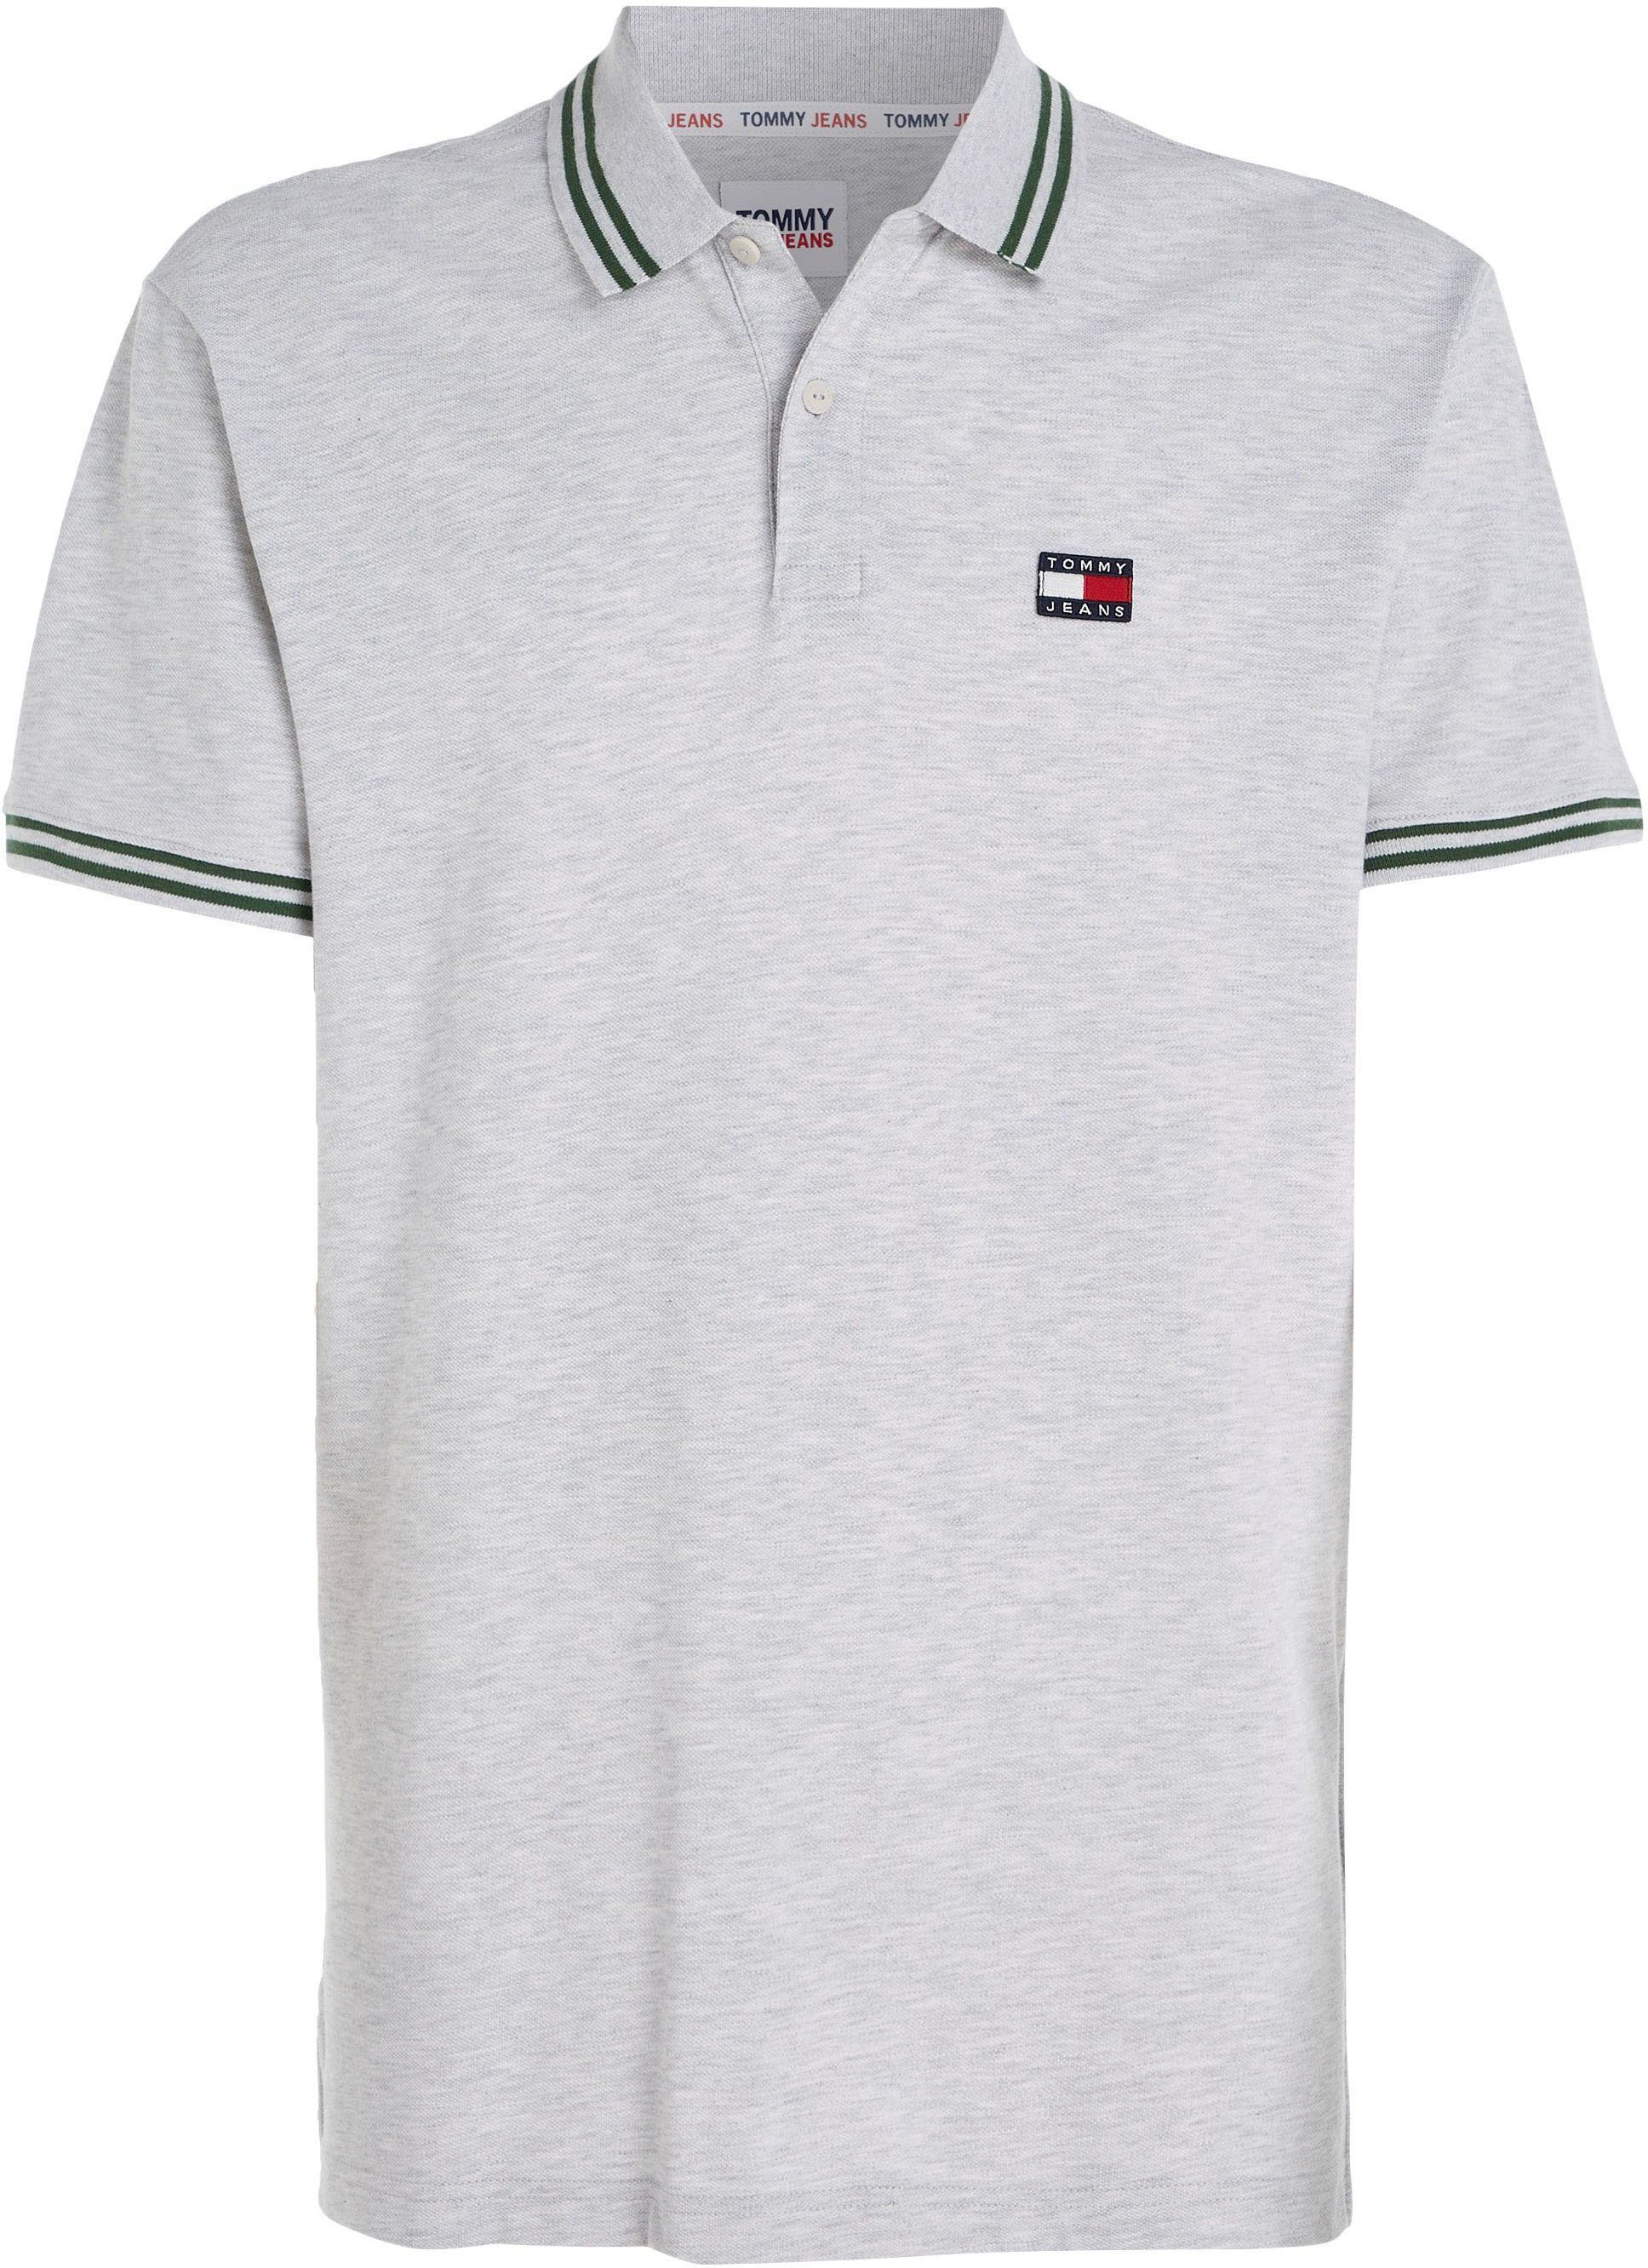 Tommy Silver DETAIL CLSC Htr TIPPING Poloshirt Grey Jeans TJM POLO